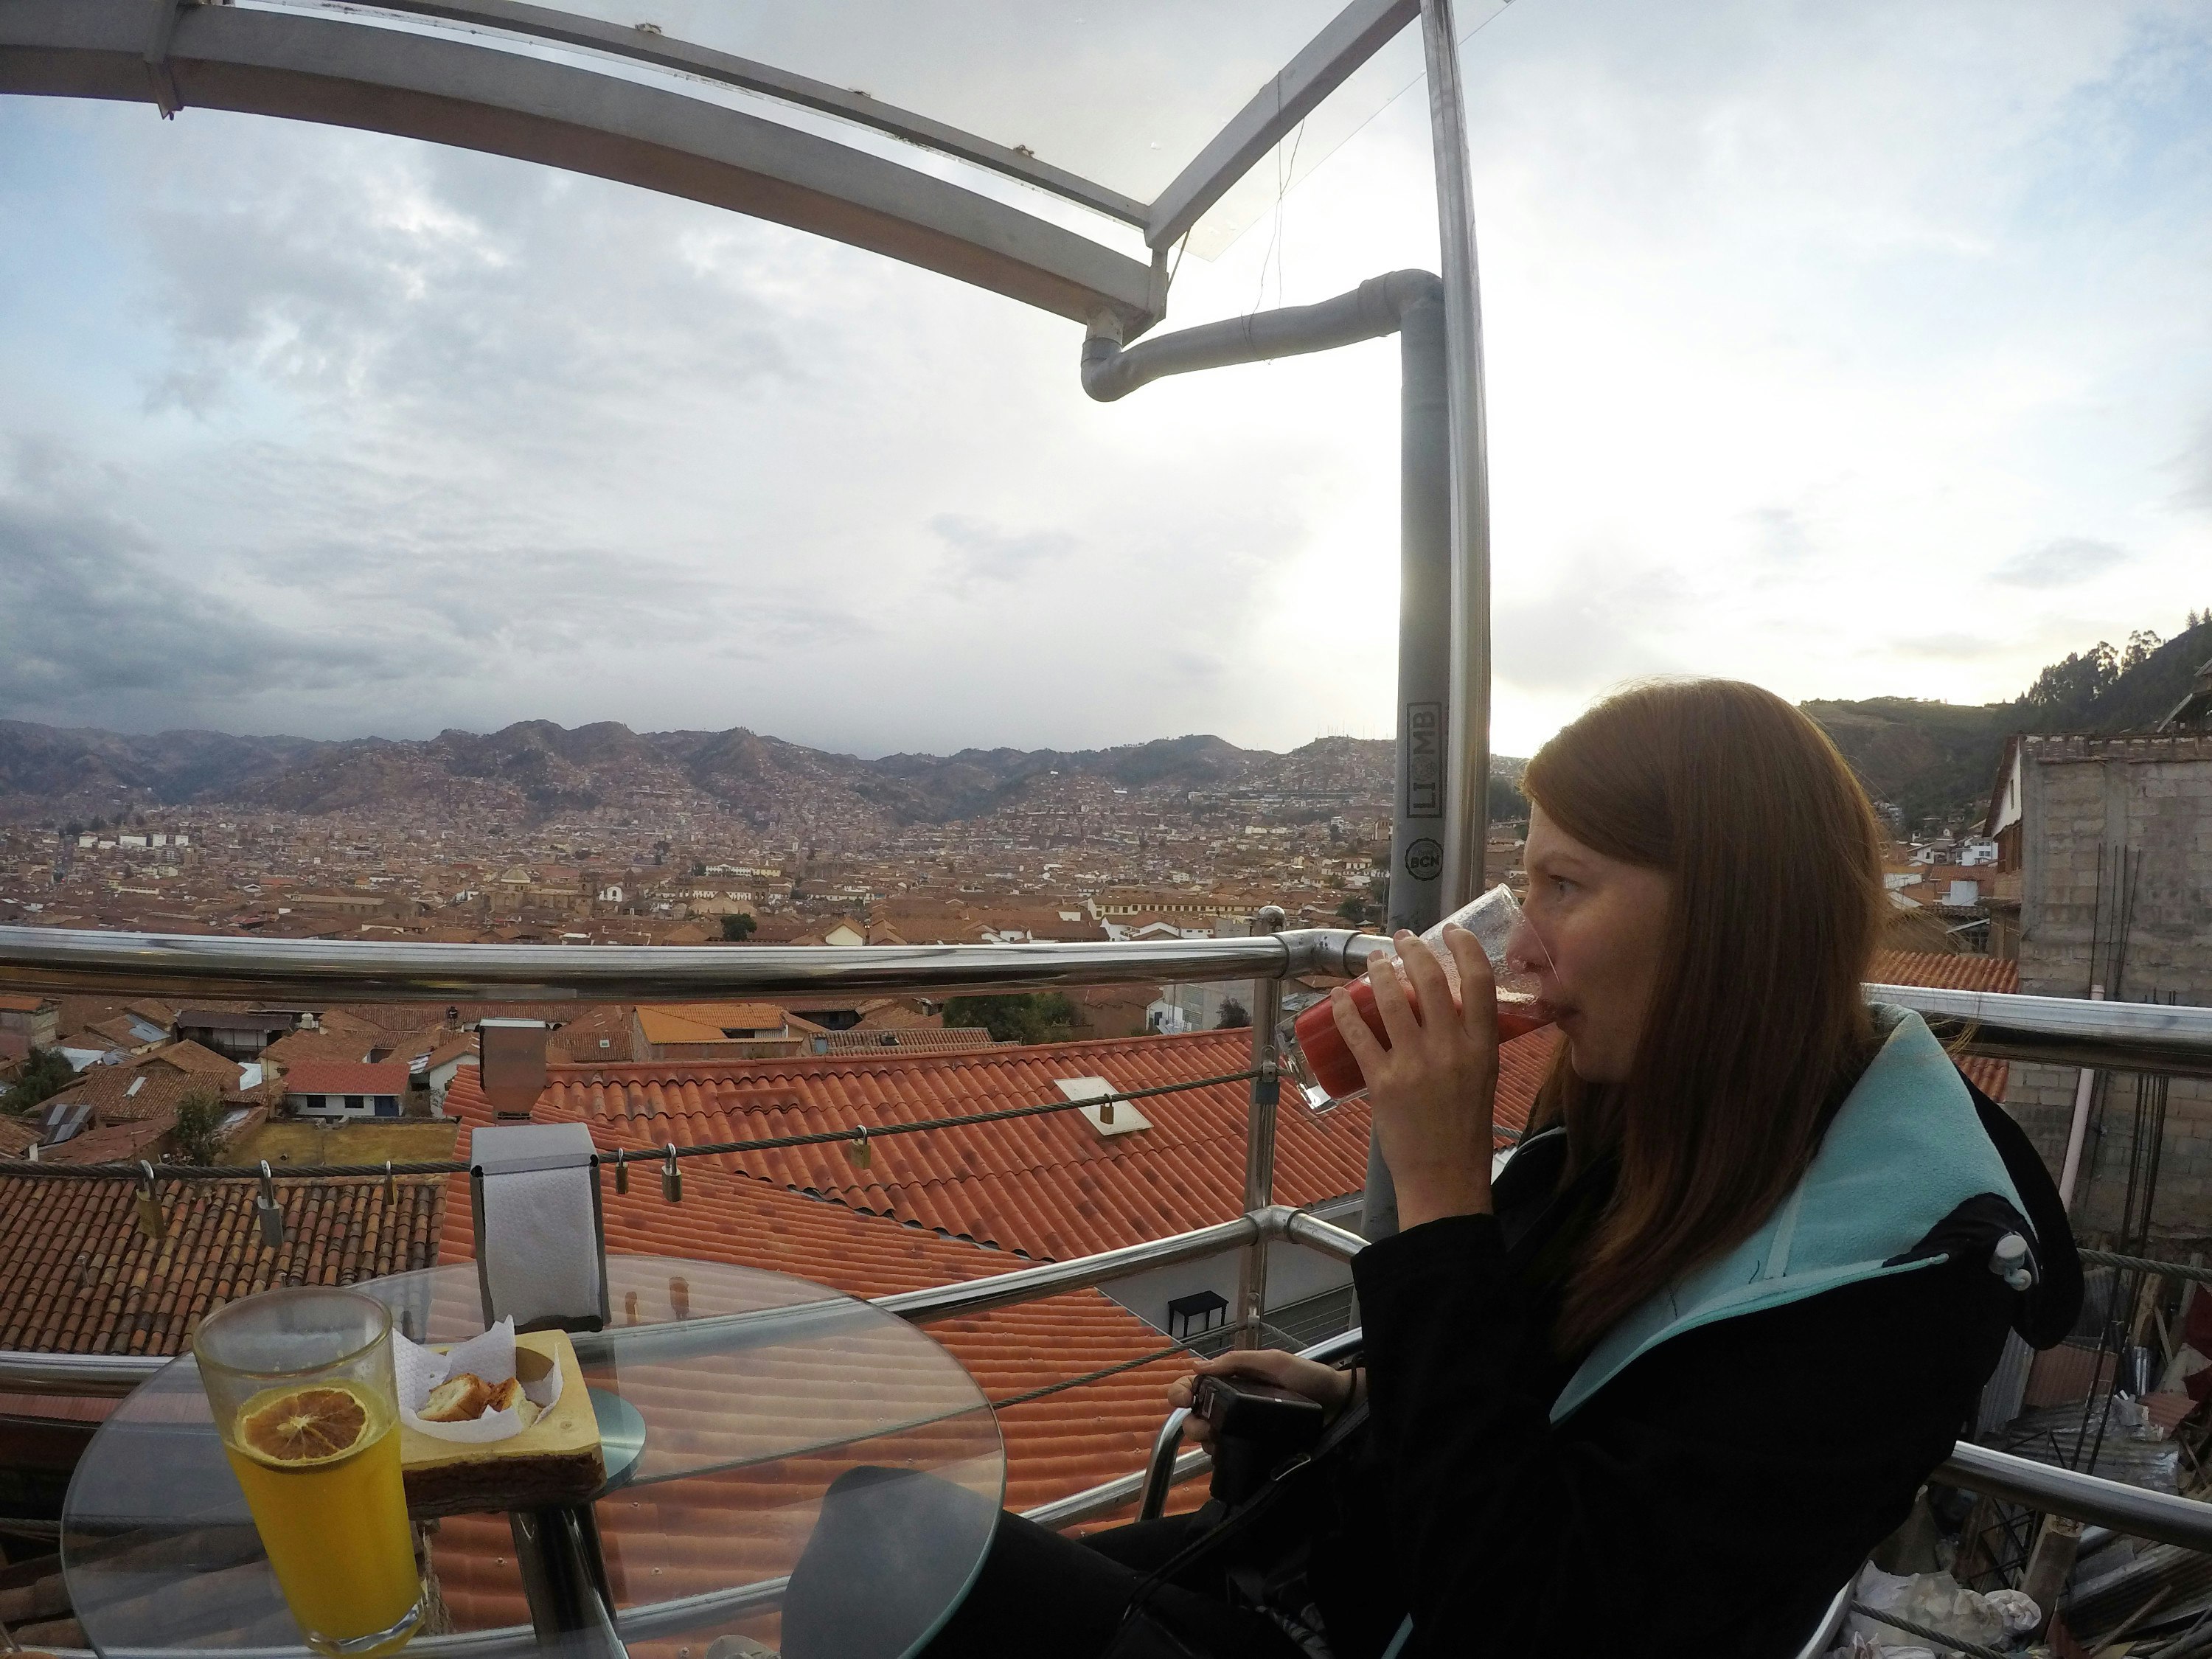 A woman sits sipping a juice on a rooftop terrace overlooking Cuzco.